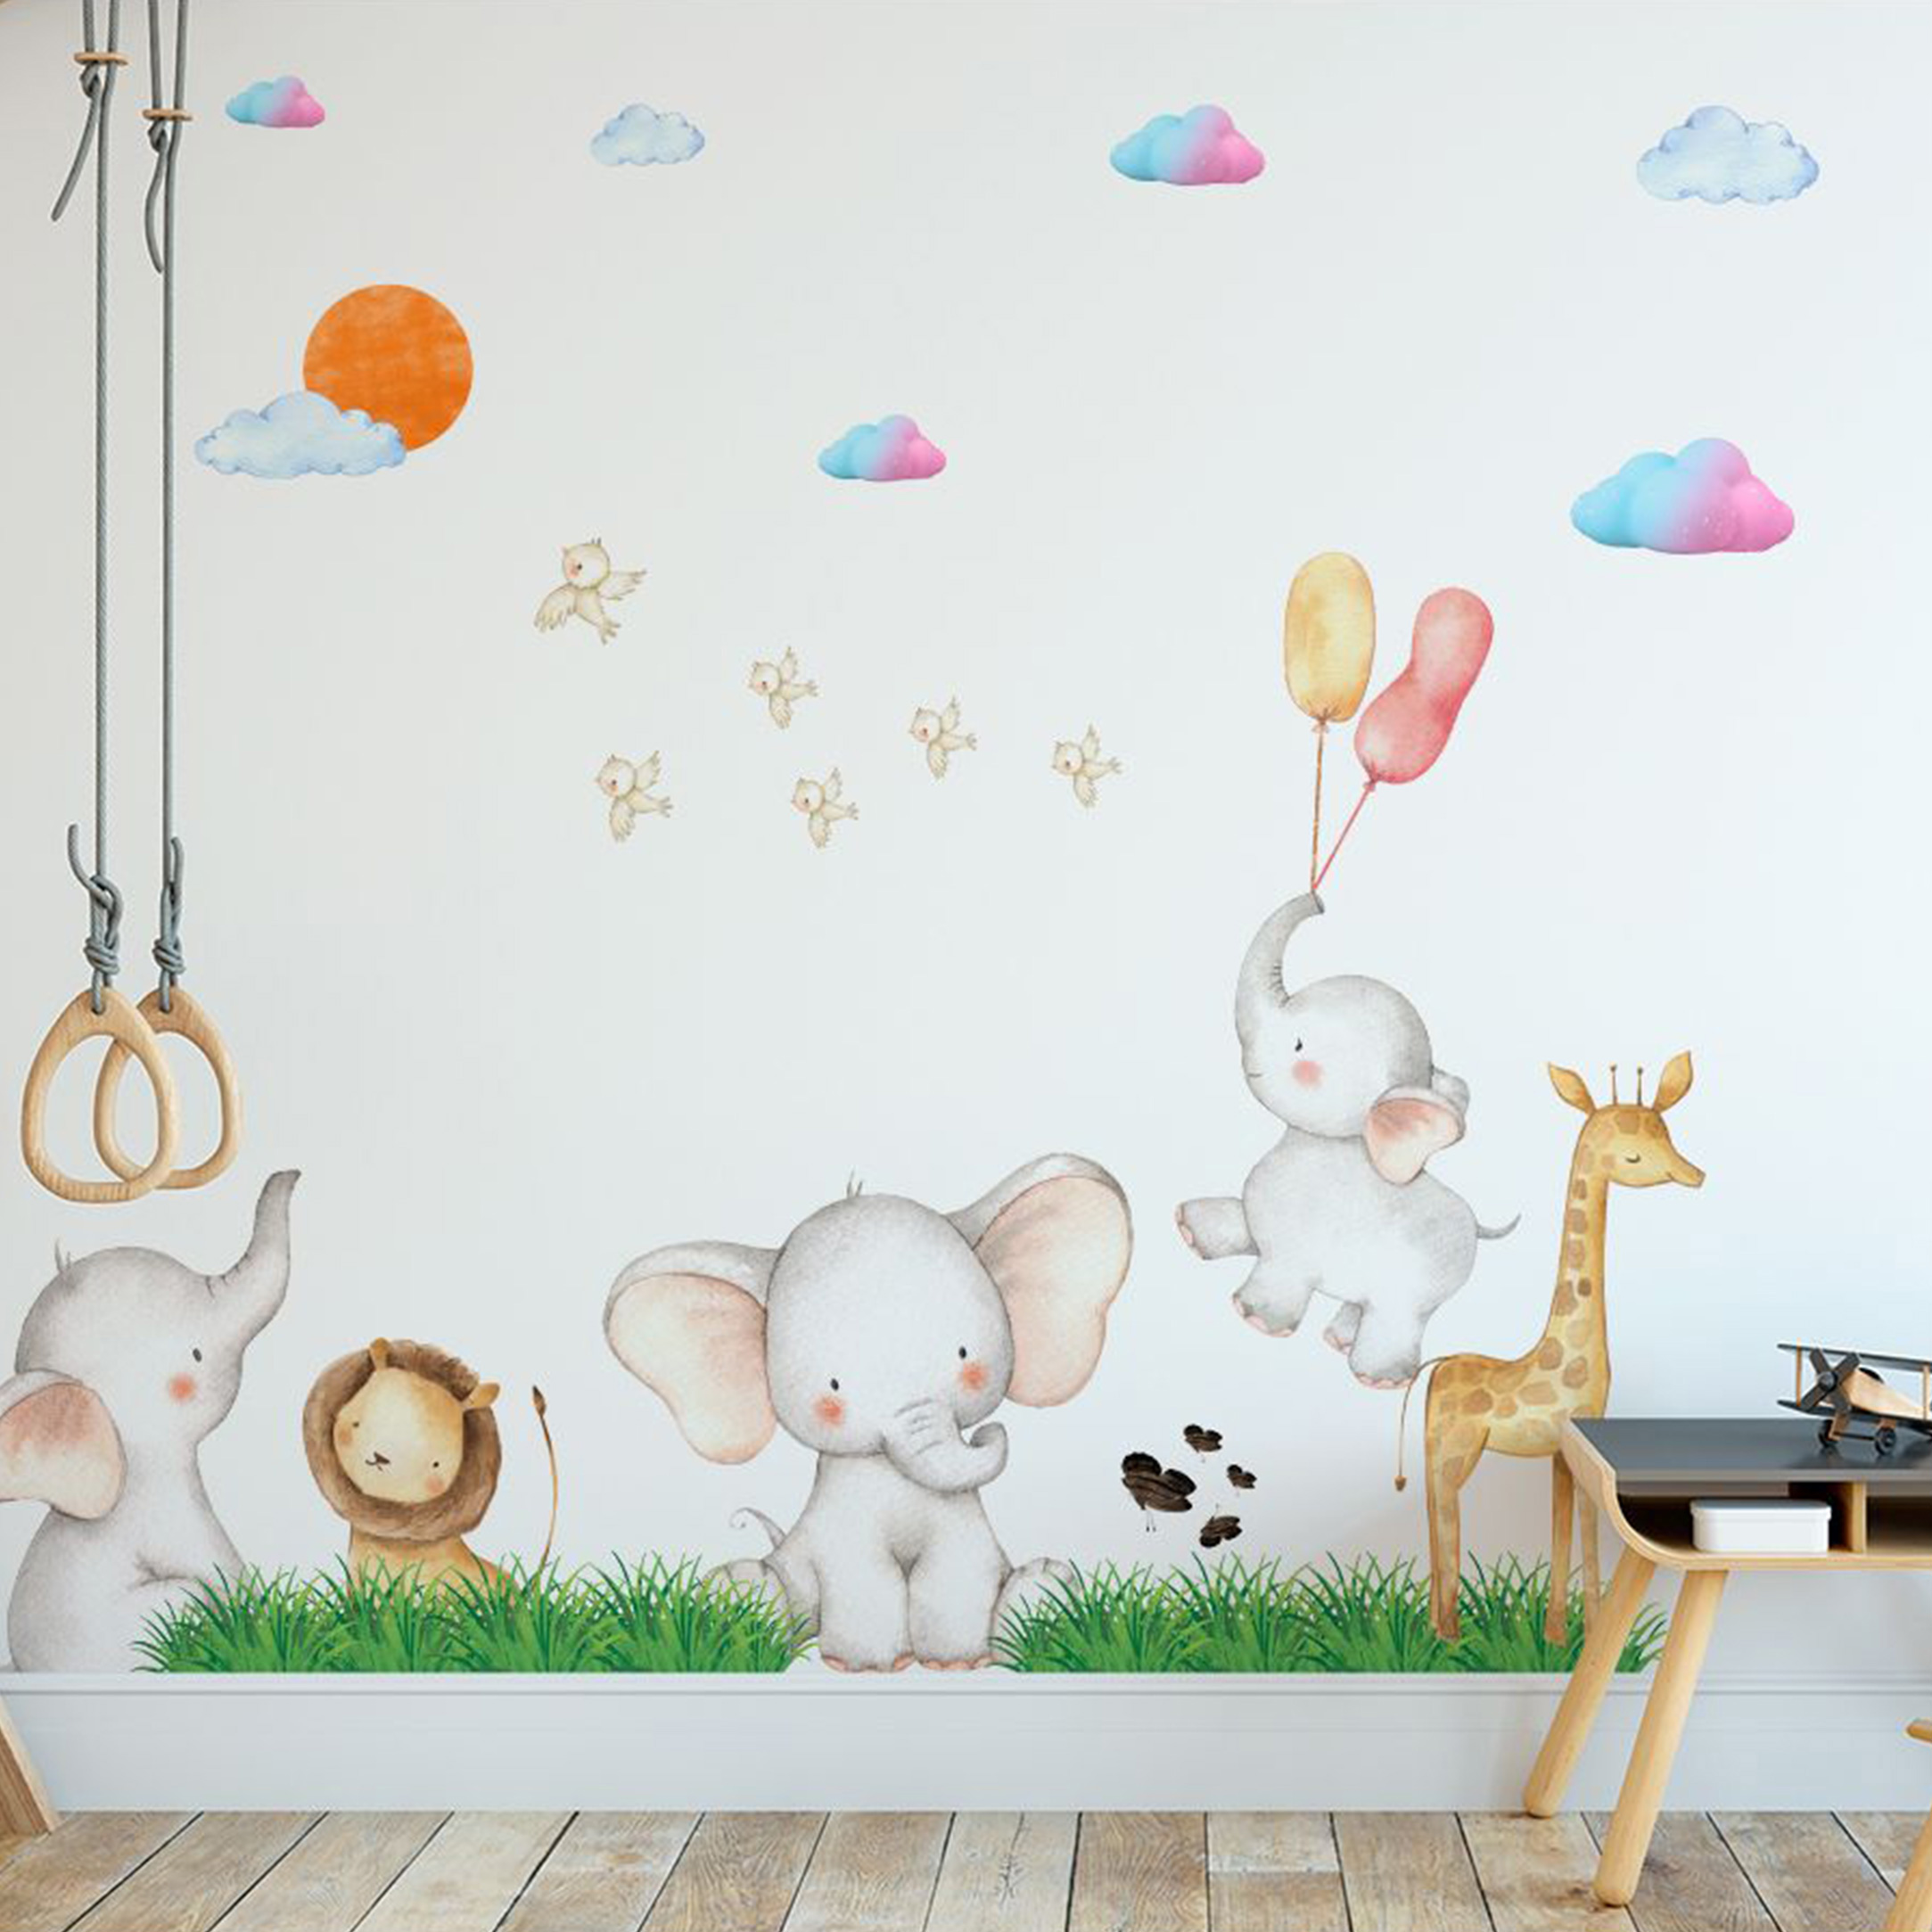 9 Cute Nursery Wall Stickers for Designing the Best Baby Room